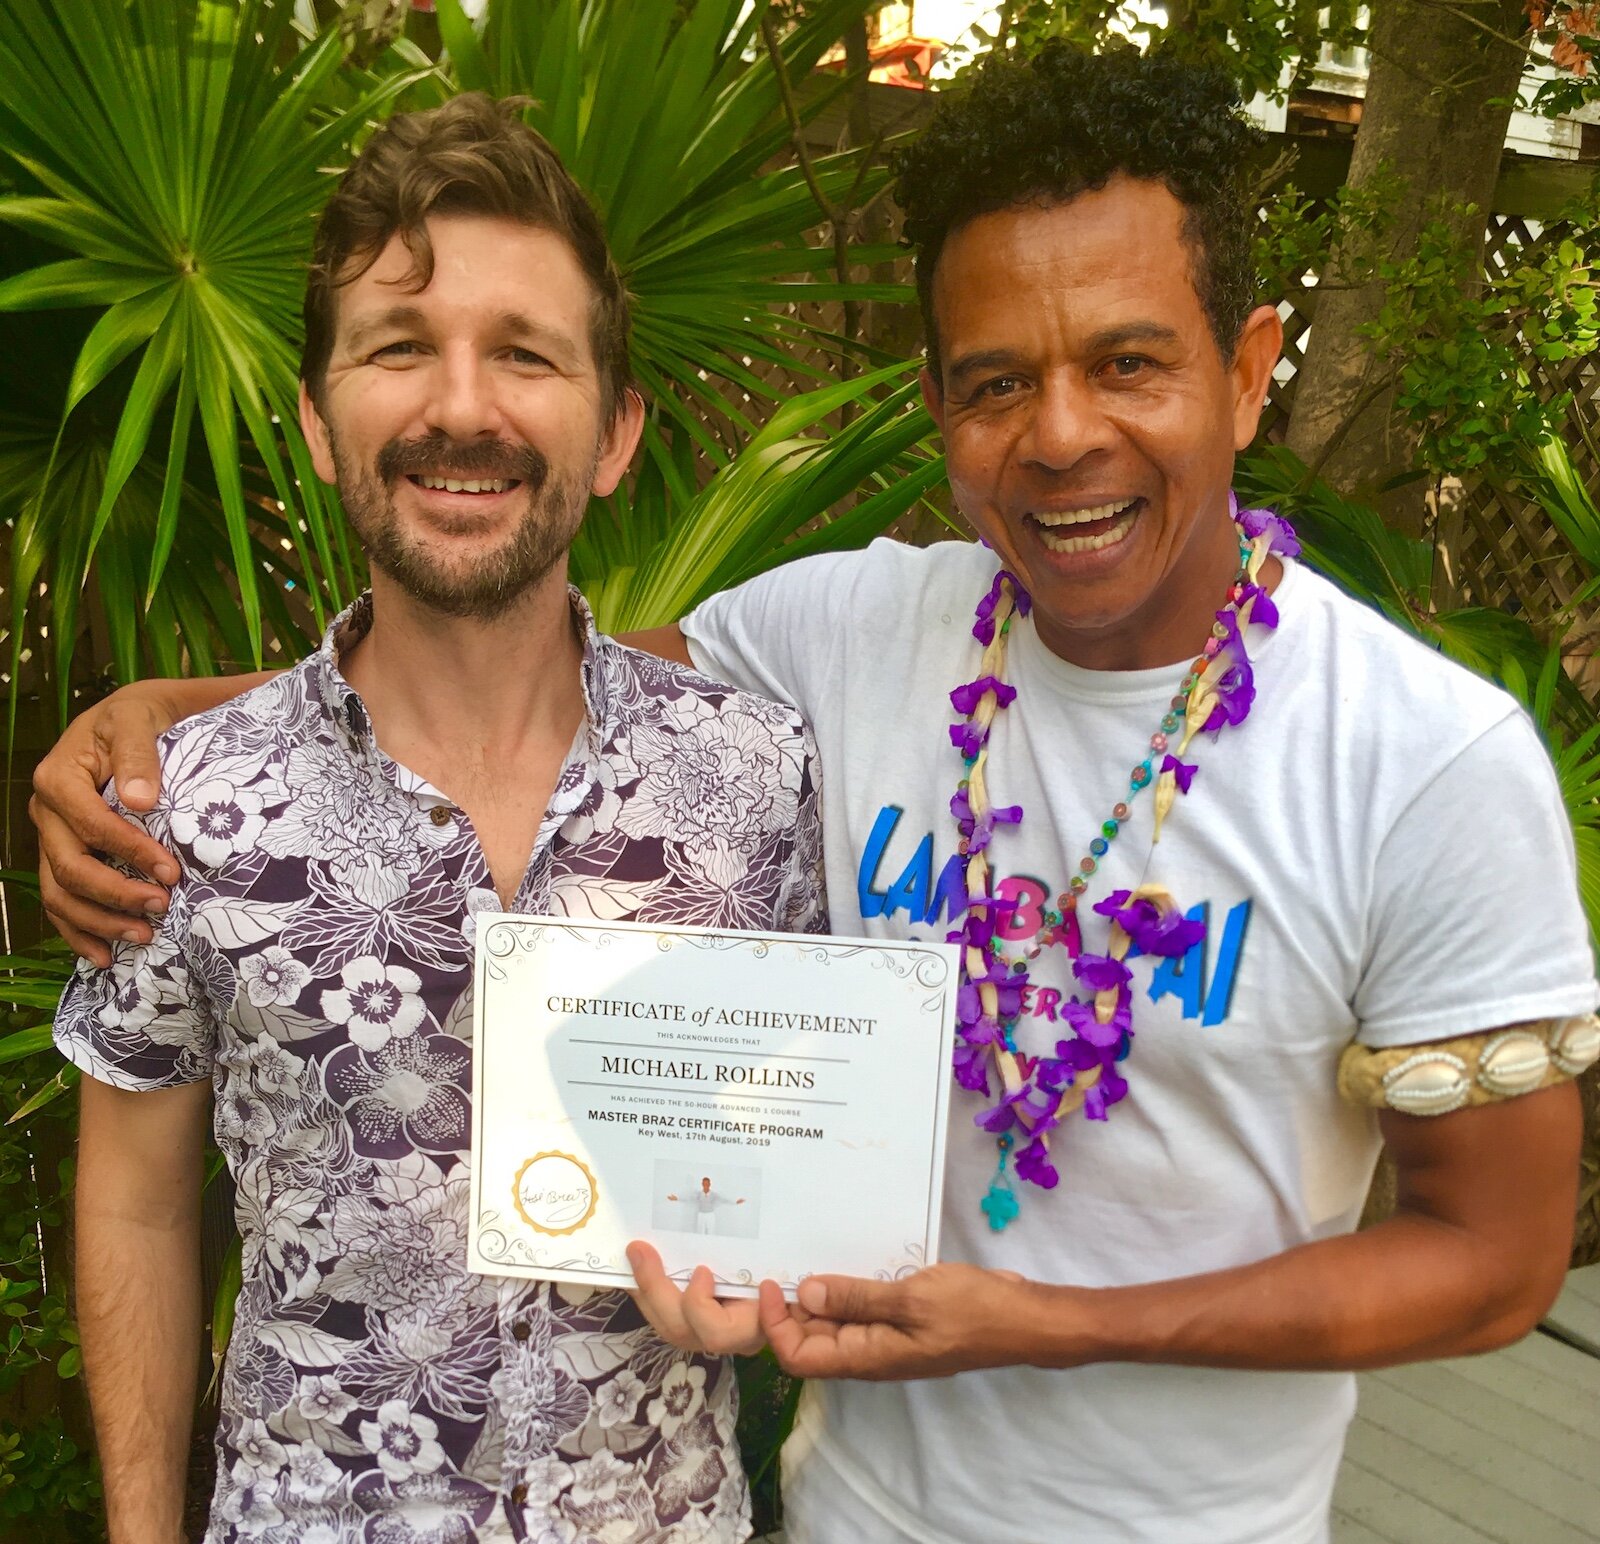 Michael Rollins Completes Master Braz Certificate Course 2019